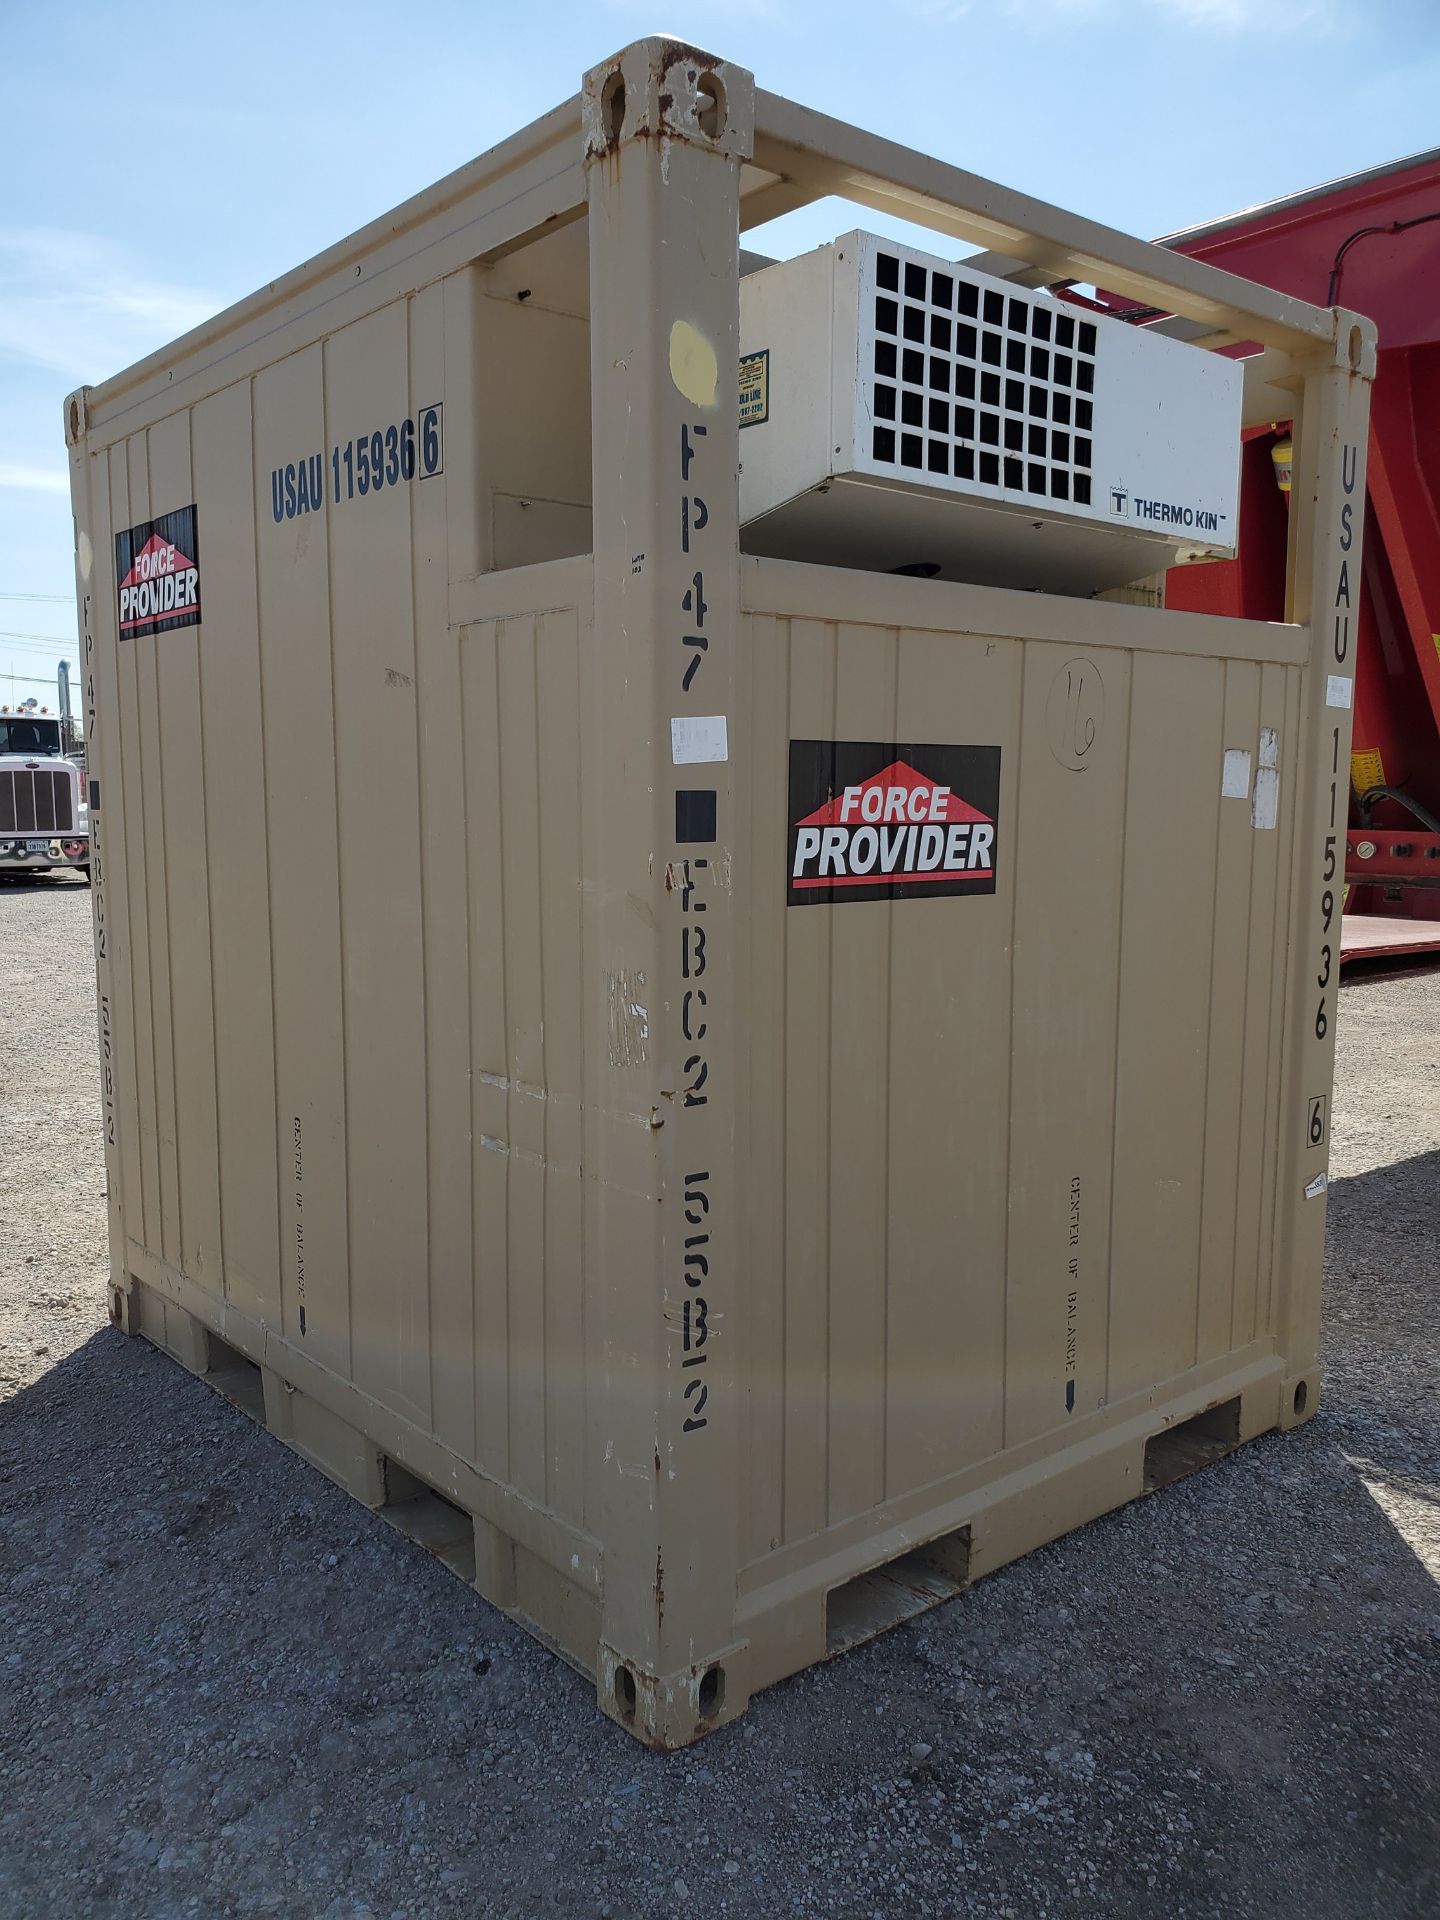 2009 FORCE PROVIDER REFRIGERATED CONTAINER 8' X 8' X 6.5', LESS THAN 200 HOURS - Image 8 of 11